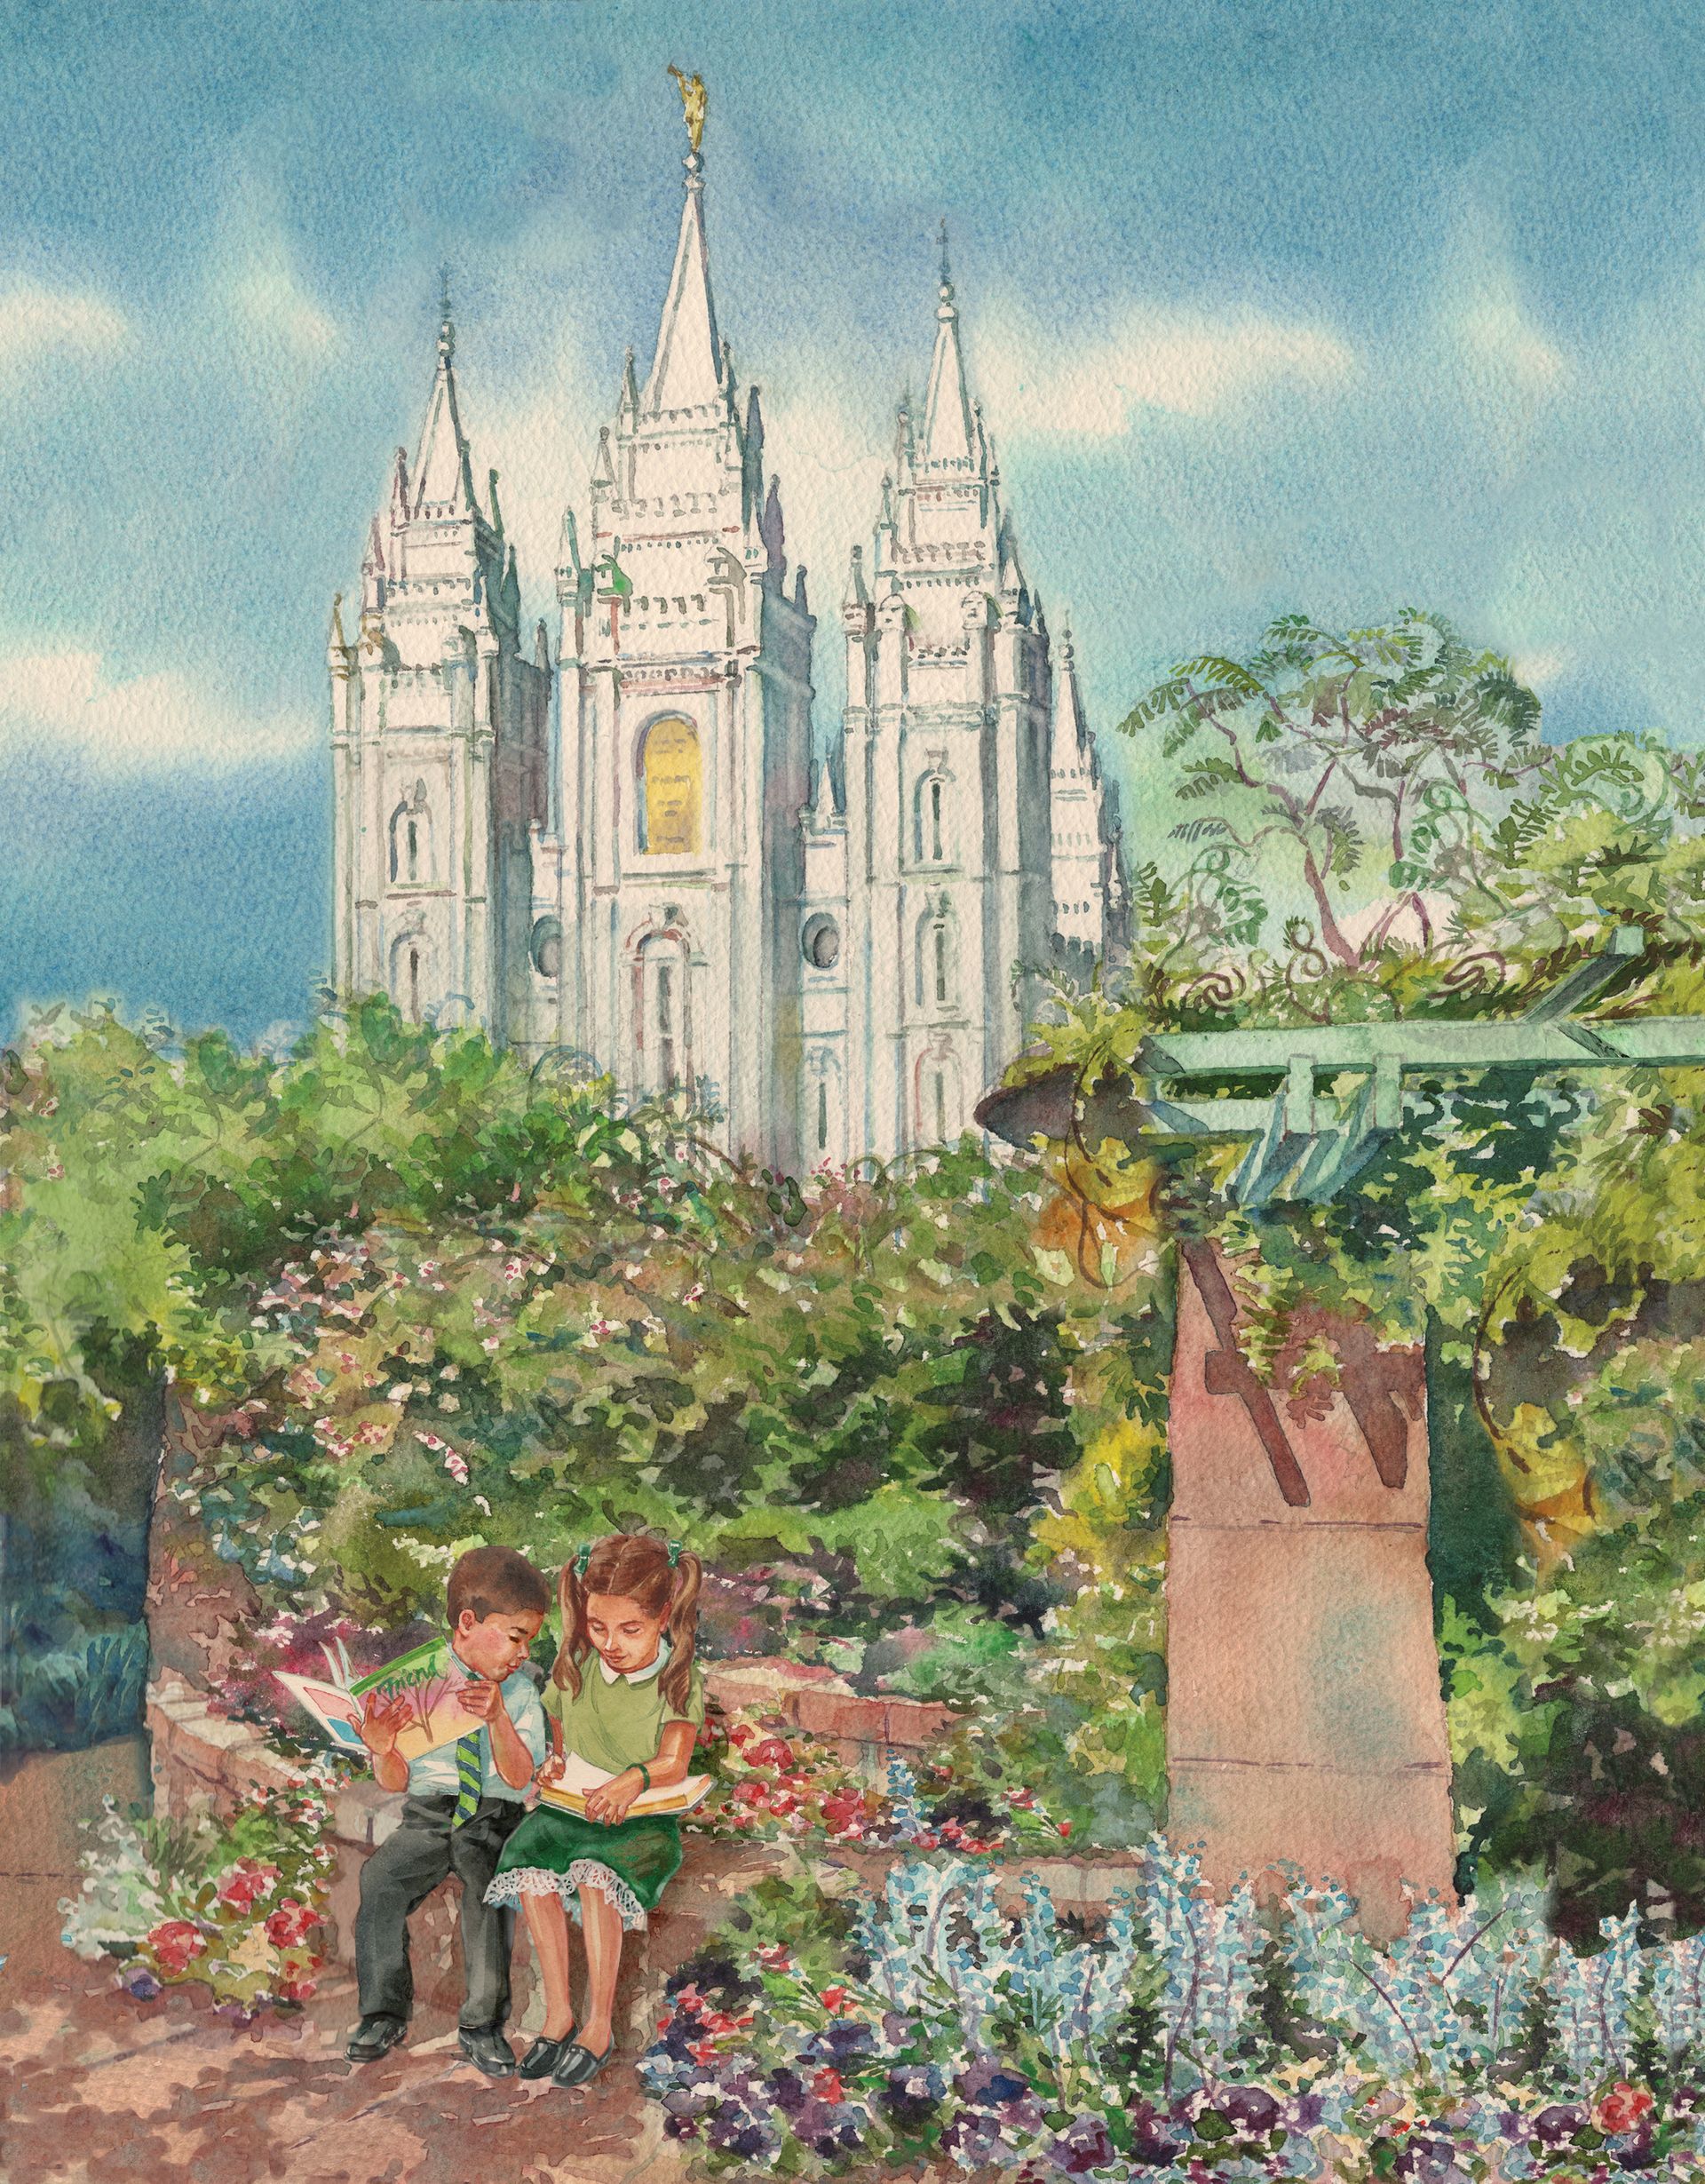 A boy and a girl sit on a bench at Temple Square together.